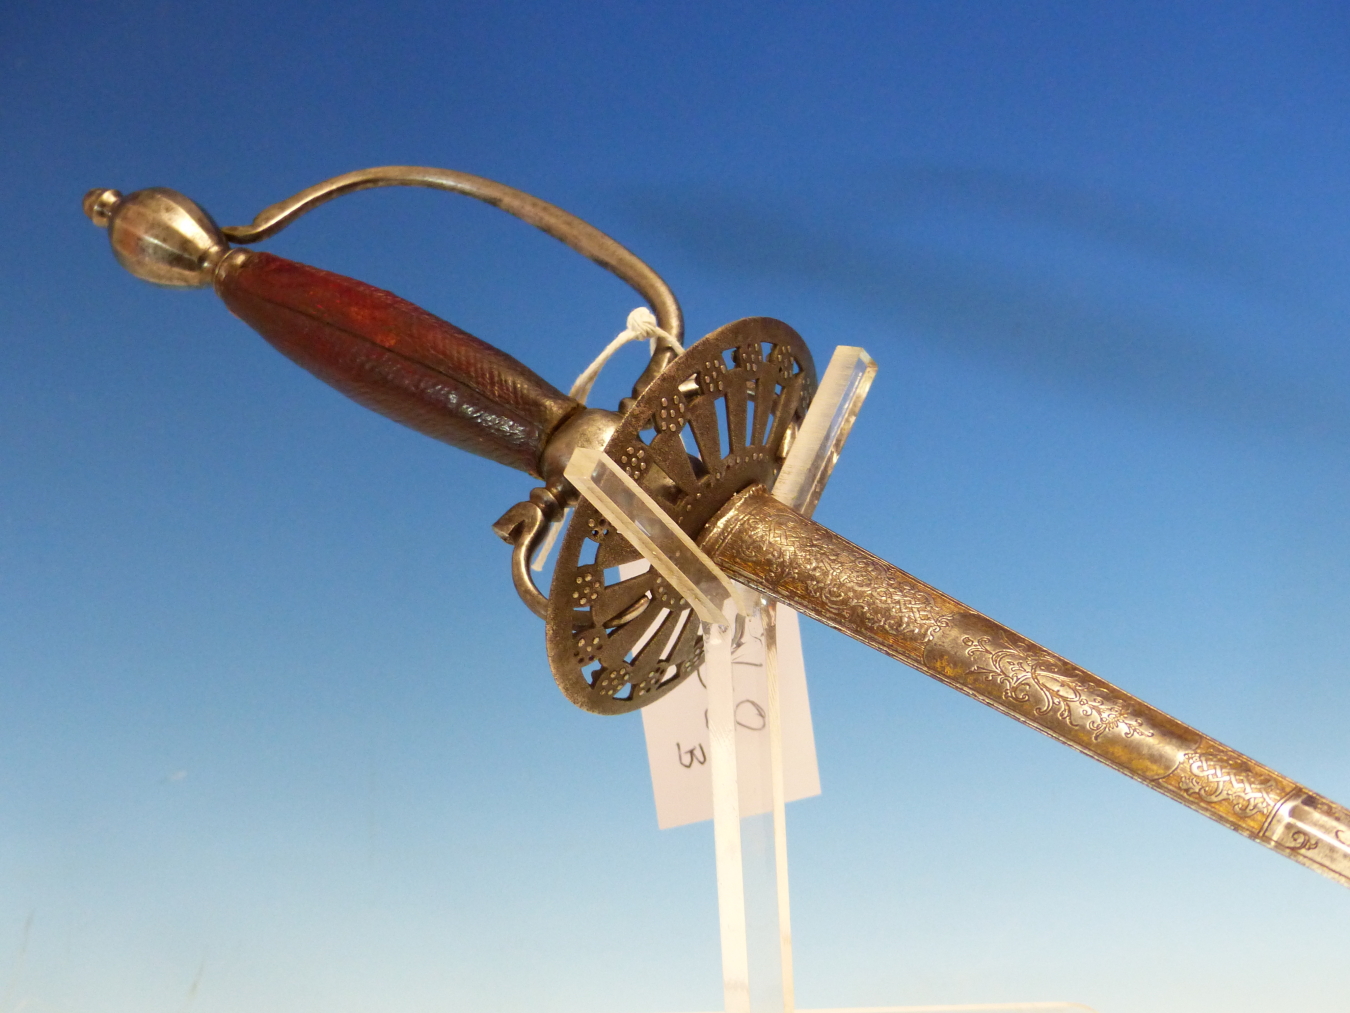 AN EARLY 18th.C.OFFICER'S SMALL / DRESS SWORD, BLADE LENGTH 32.5" OF A FLATTENED DIAMOND SECTION